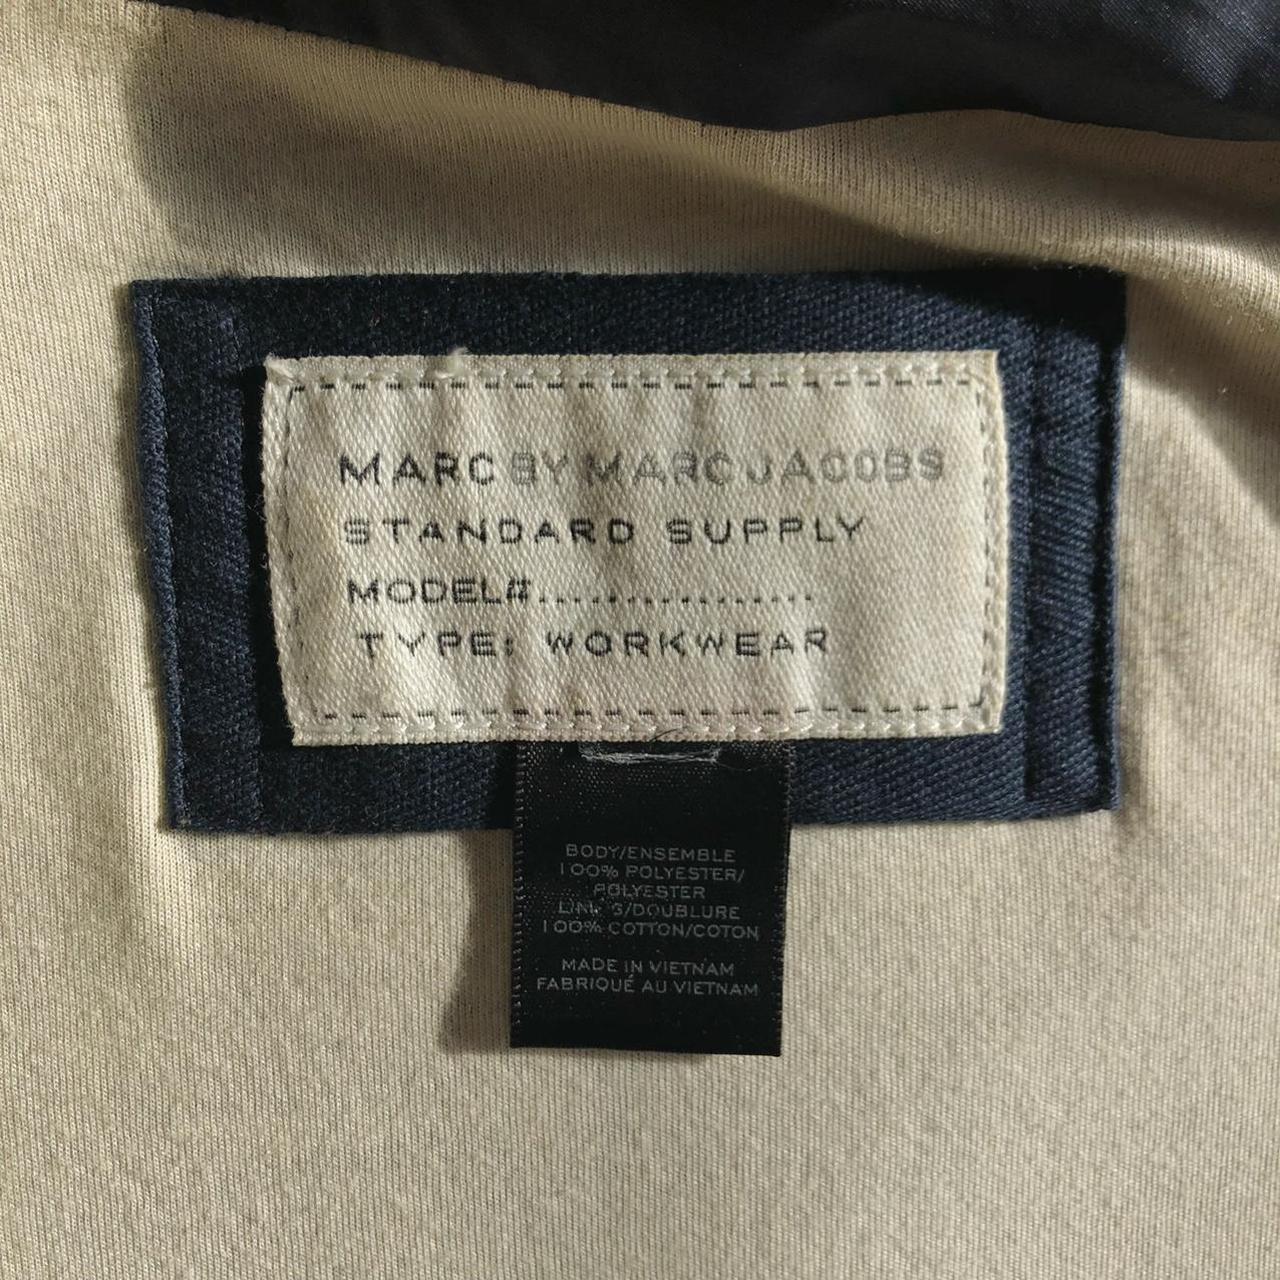 Marc by Marc Jacobs Men's Navy and Cream Jacket (3)